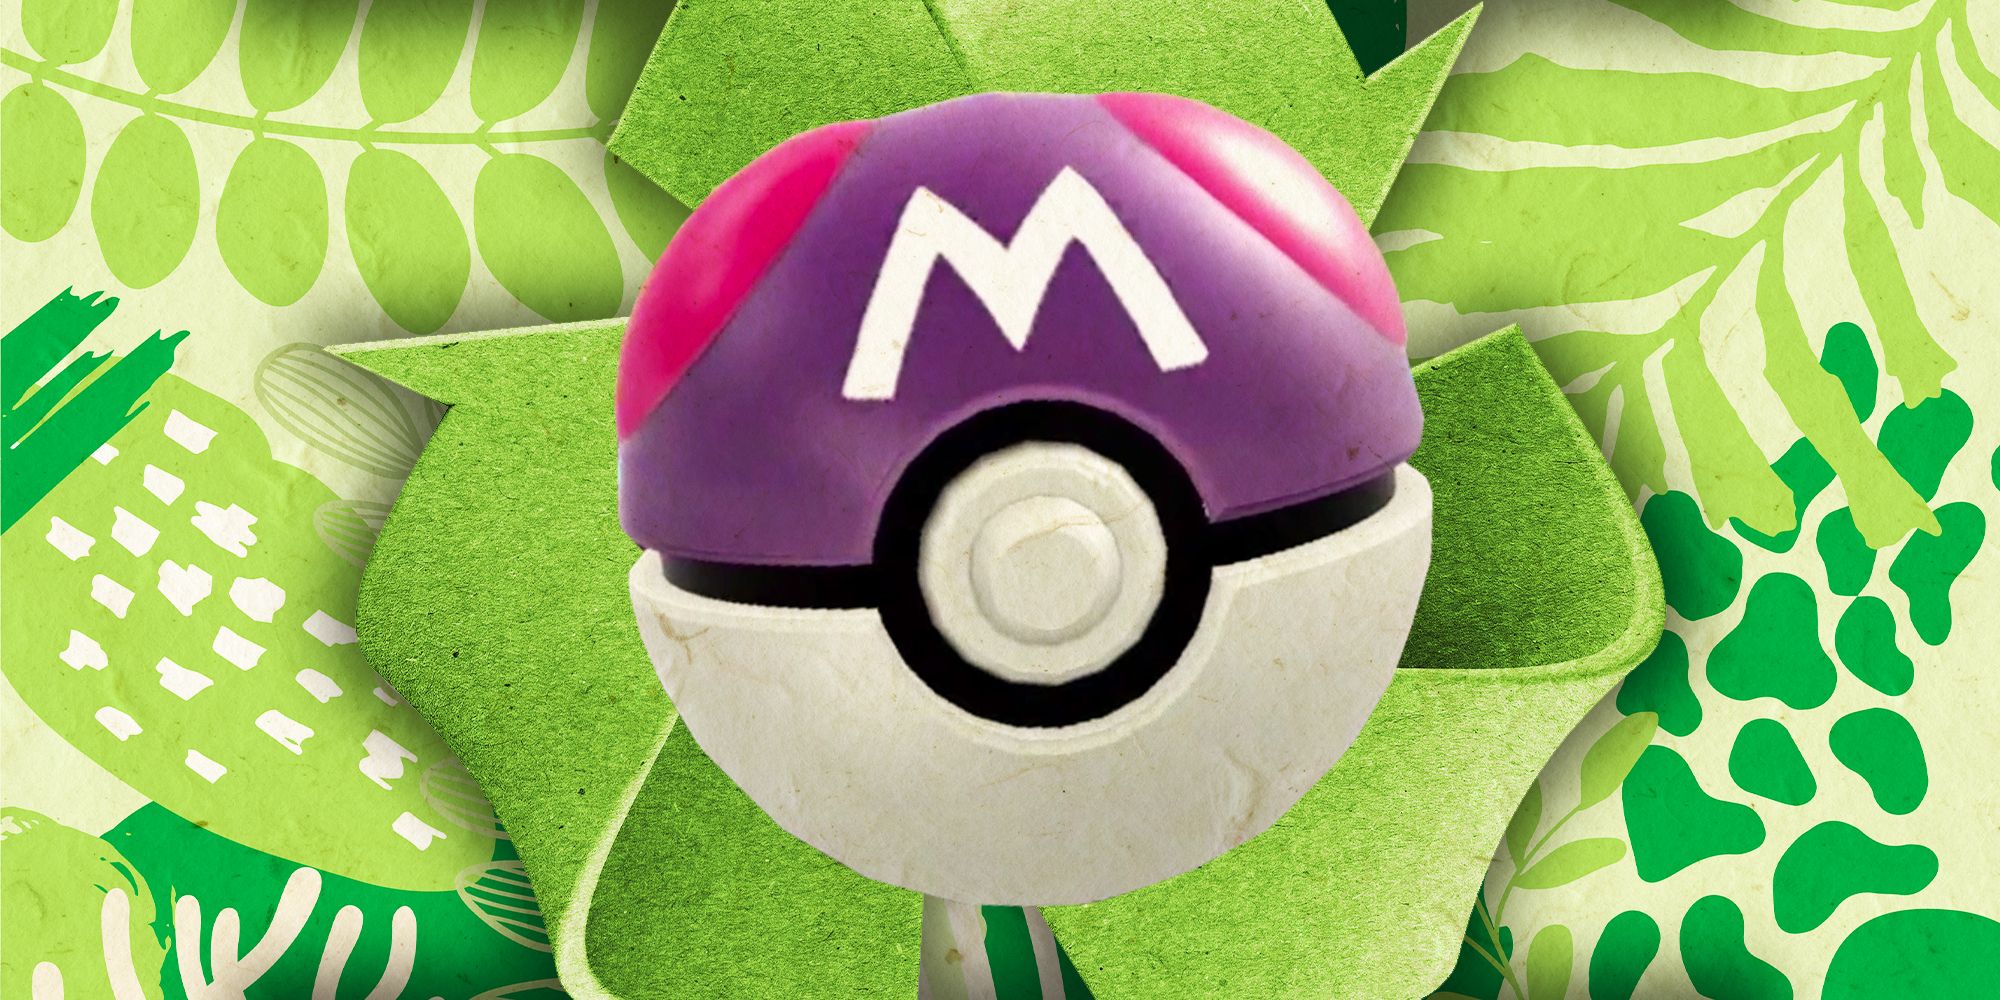 Recycle master ball